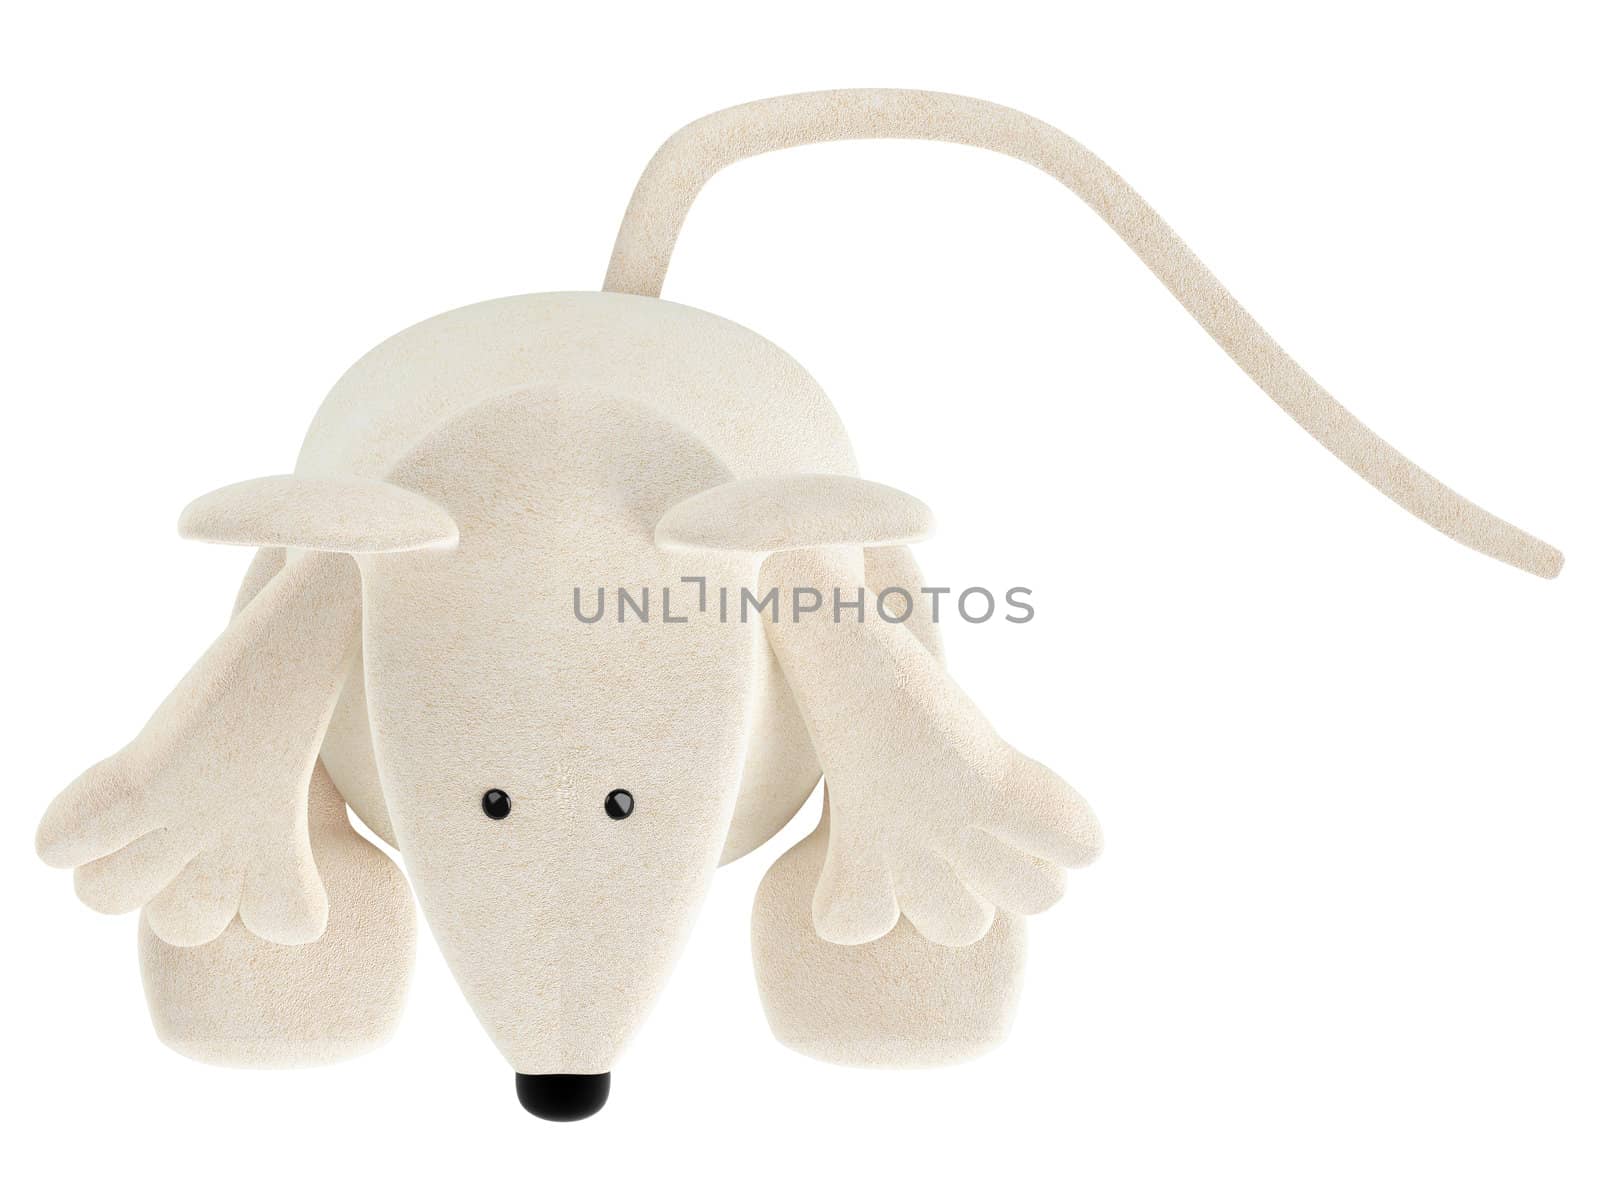 Cute white toy mouse or rat with a rather long nose sitting isolated on a white studio background